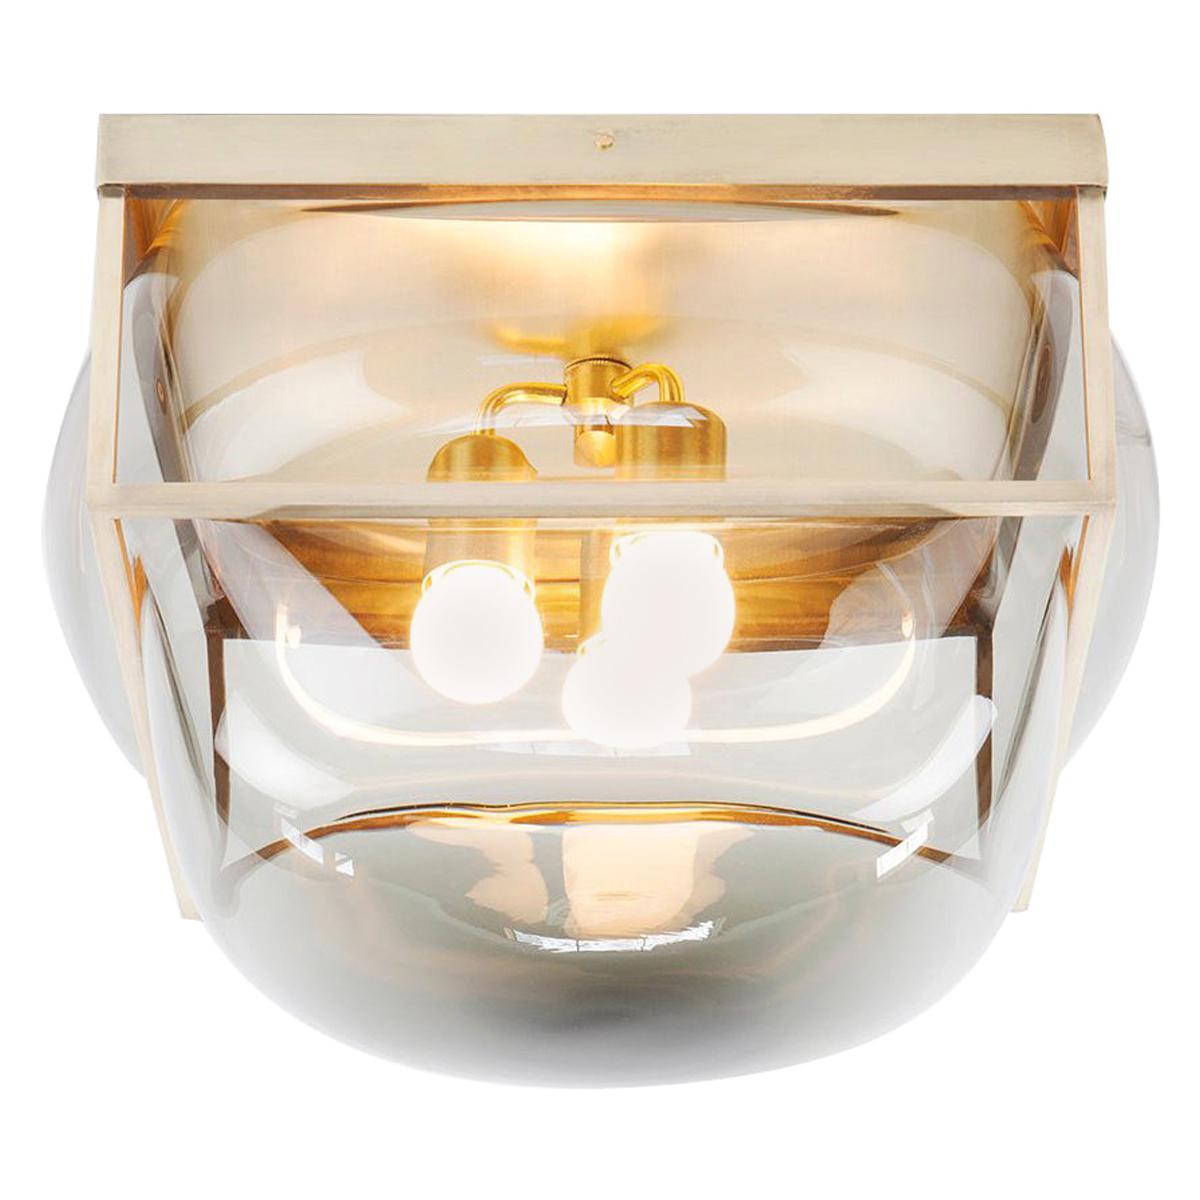 XL Bulle Light with Handblown Glass Solid Brass as Sconce, Flush, or Table Lamp For Sale